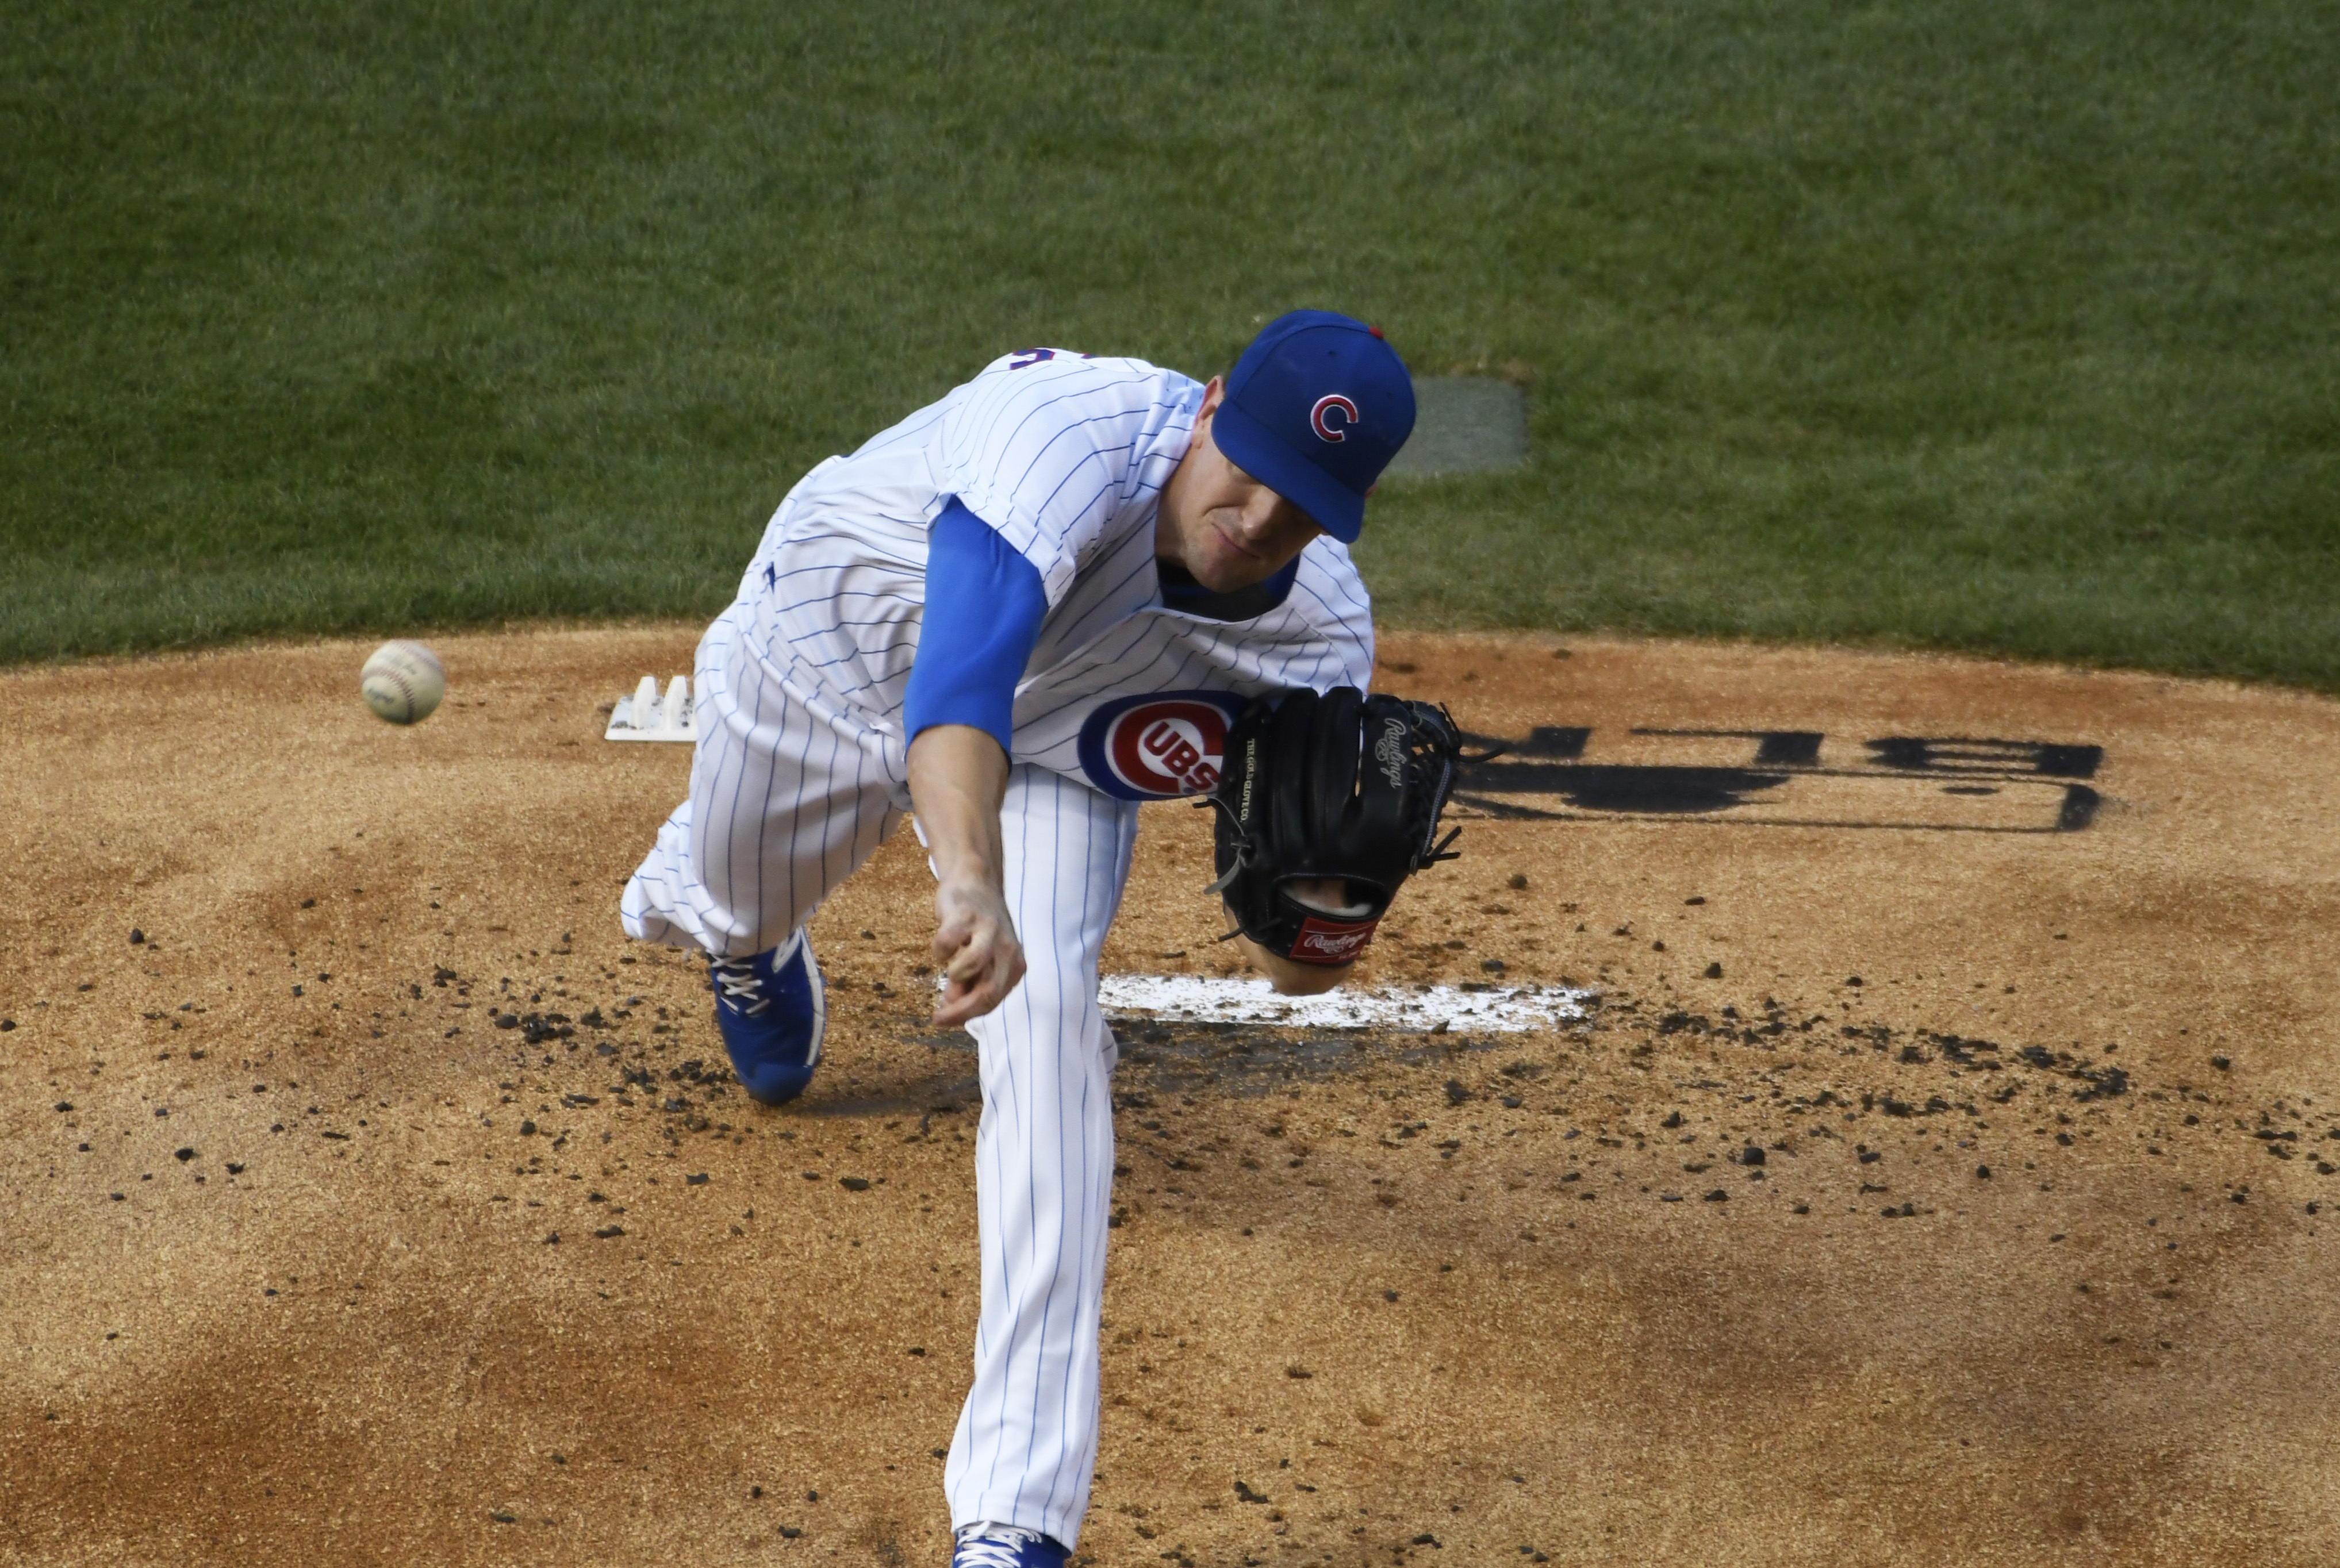 WATCH: Cubs lefty Jon Lester tosses his glove to first base for the out